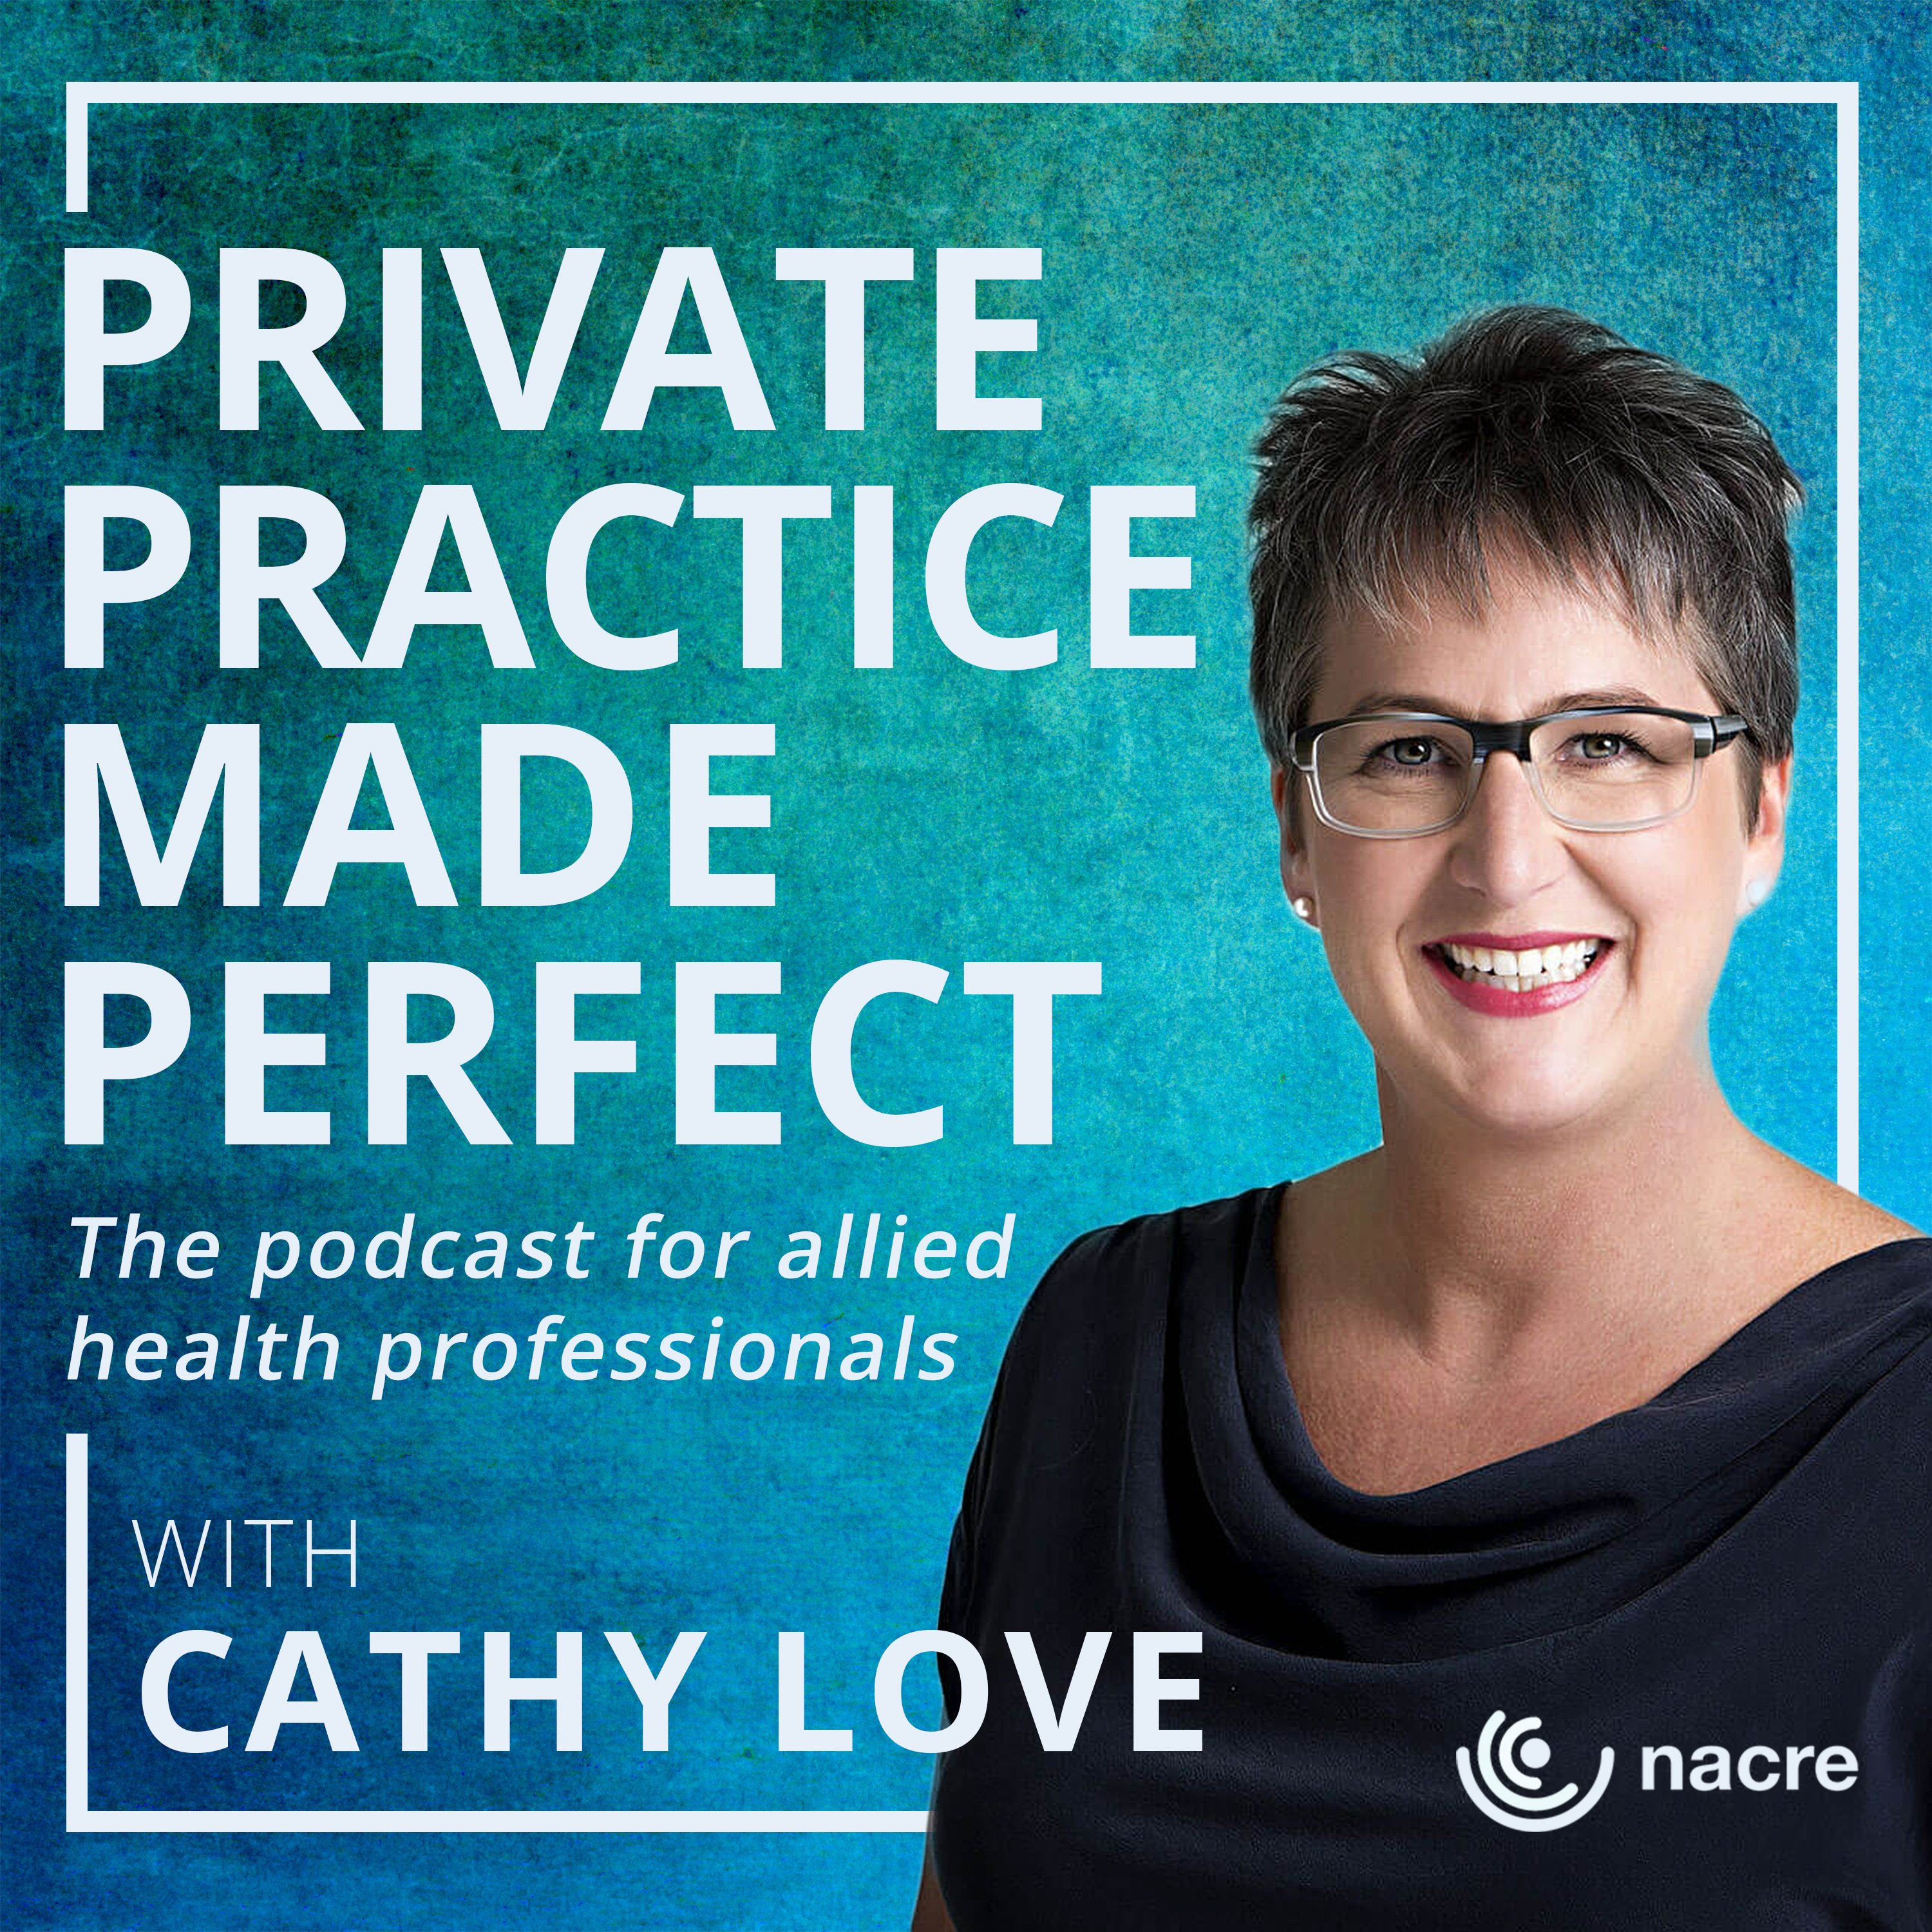 The Woman Behind the Voice of the Private Practice Made Perfect Podcast